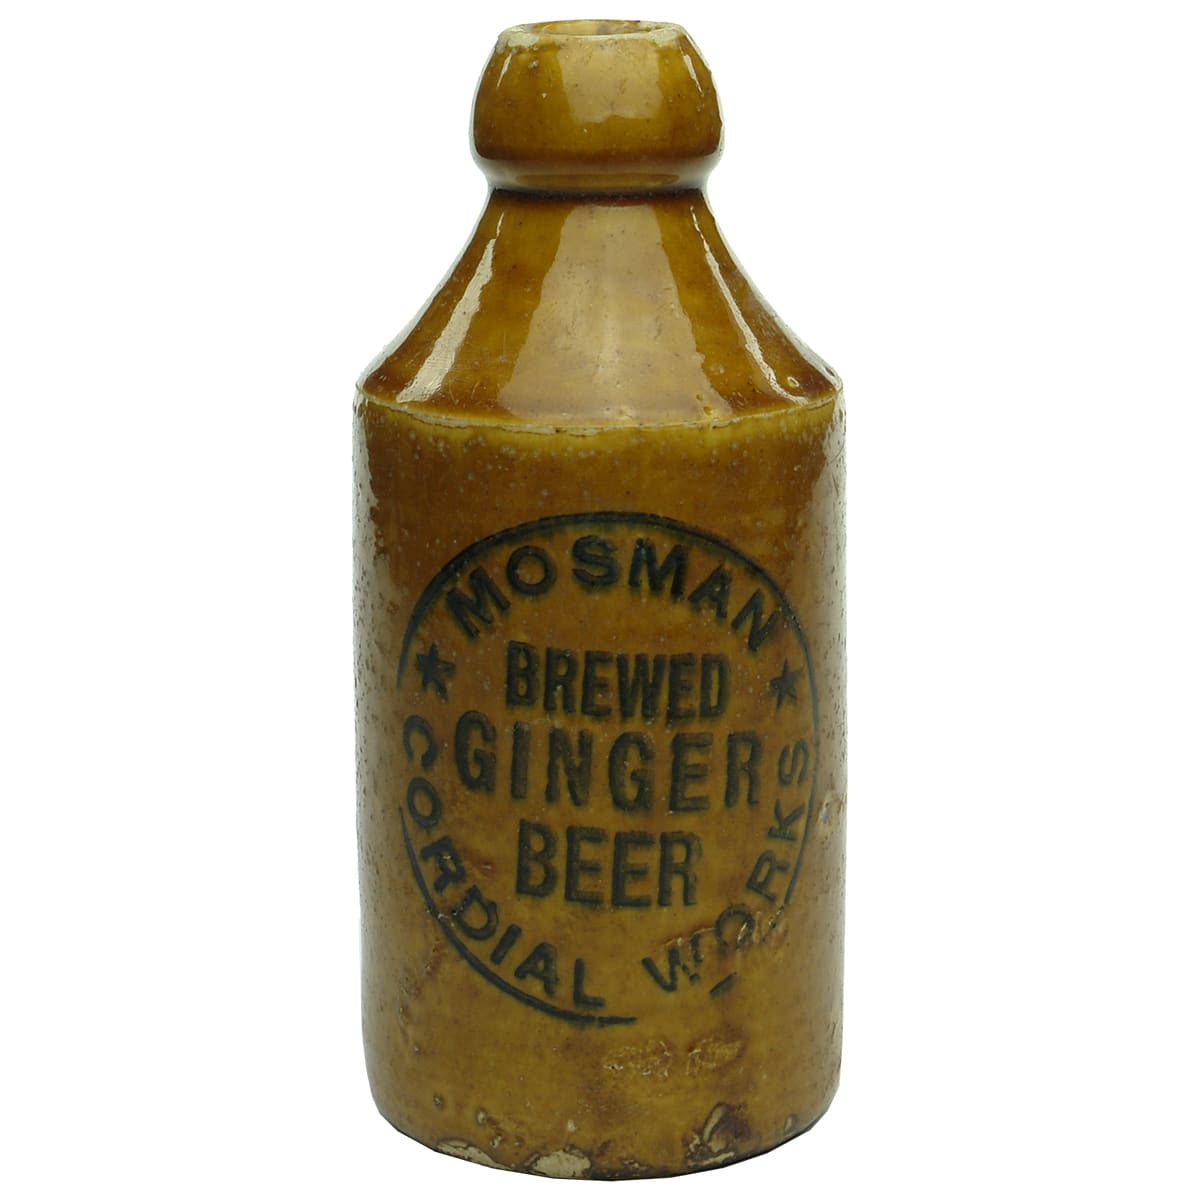 Ginger Beer. Mosman Cordial Works. Cork Stopper. Dump. All Tan. (New South Wales)